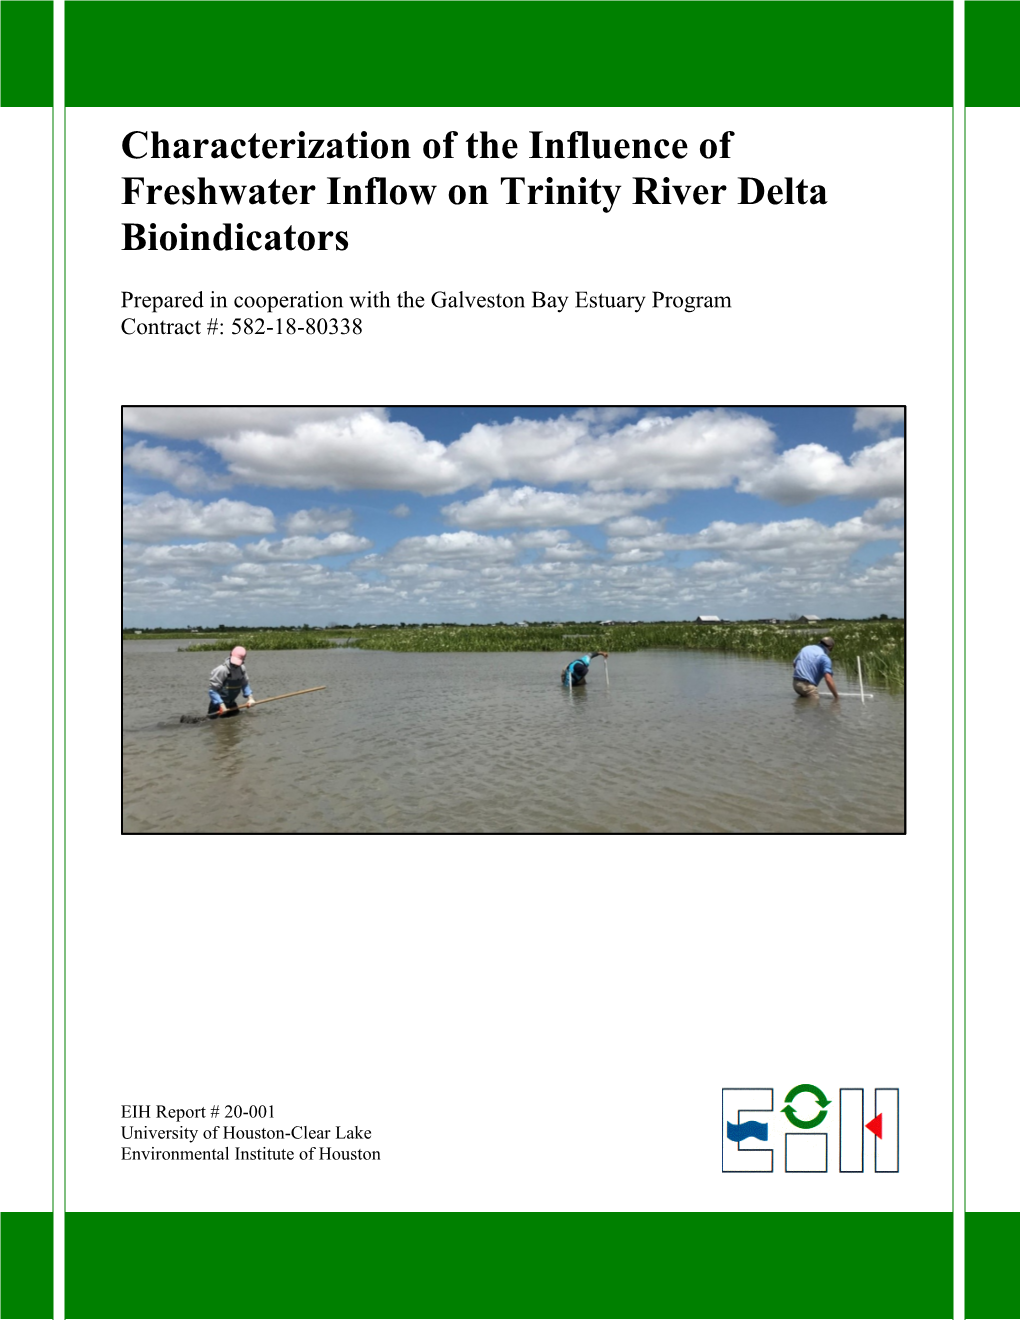 Characterization of the Influence of Freshwater Inflow on Trinity River Delta Bioindicators